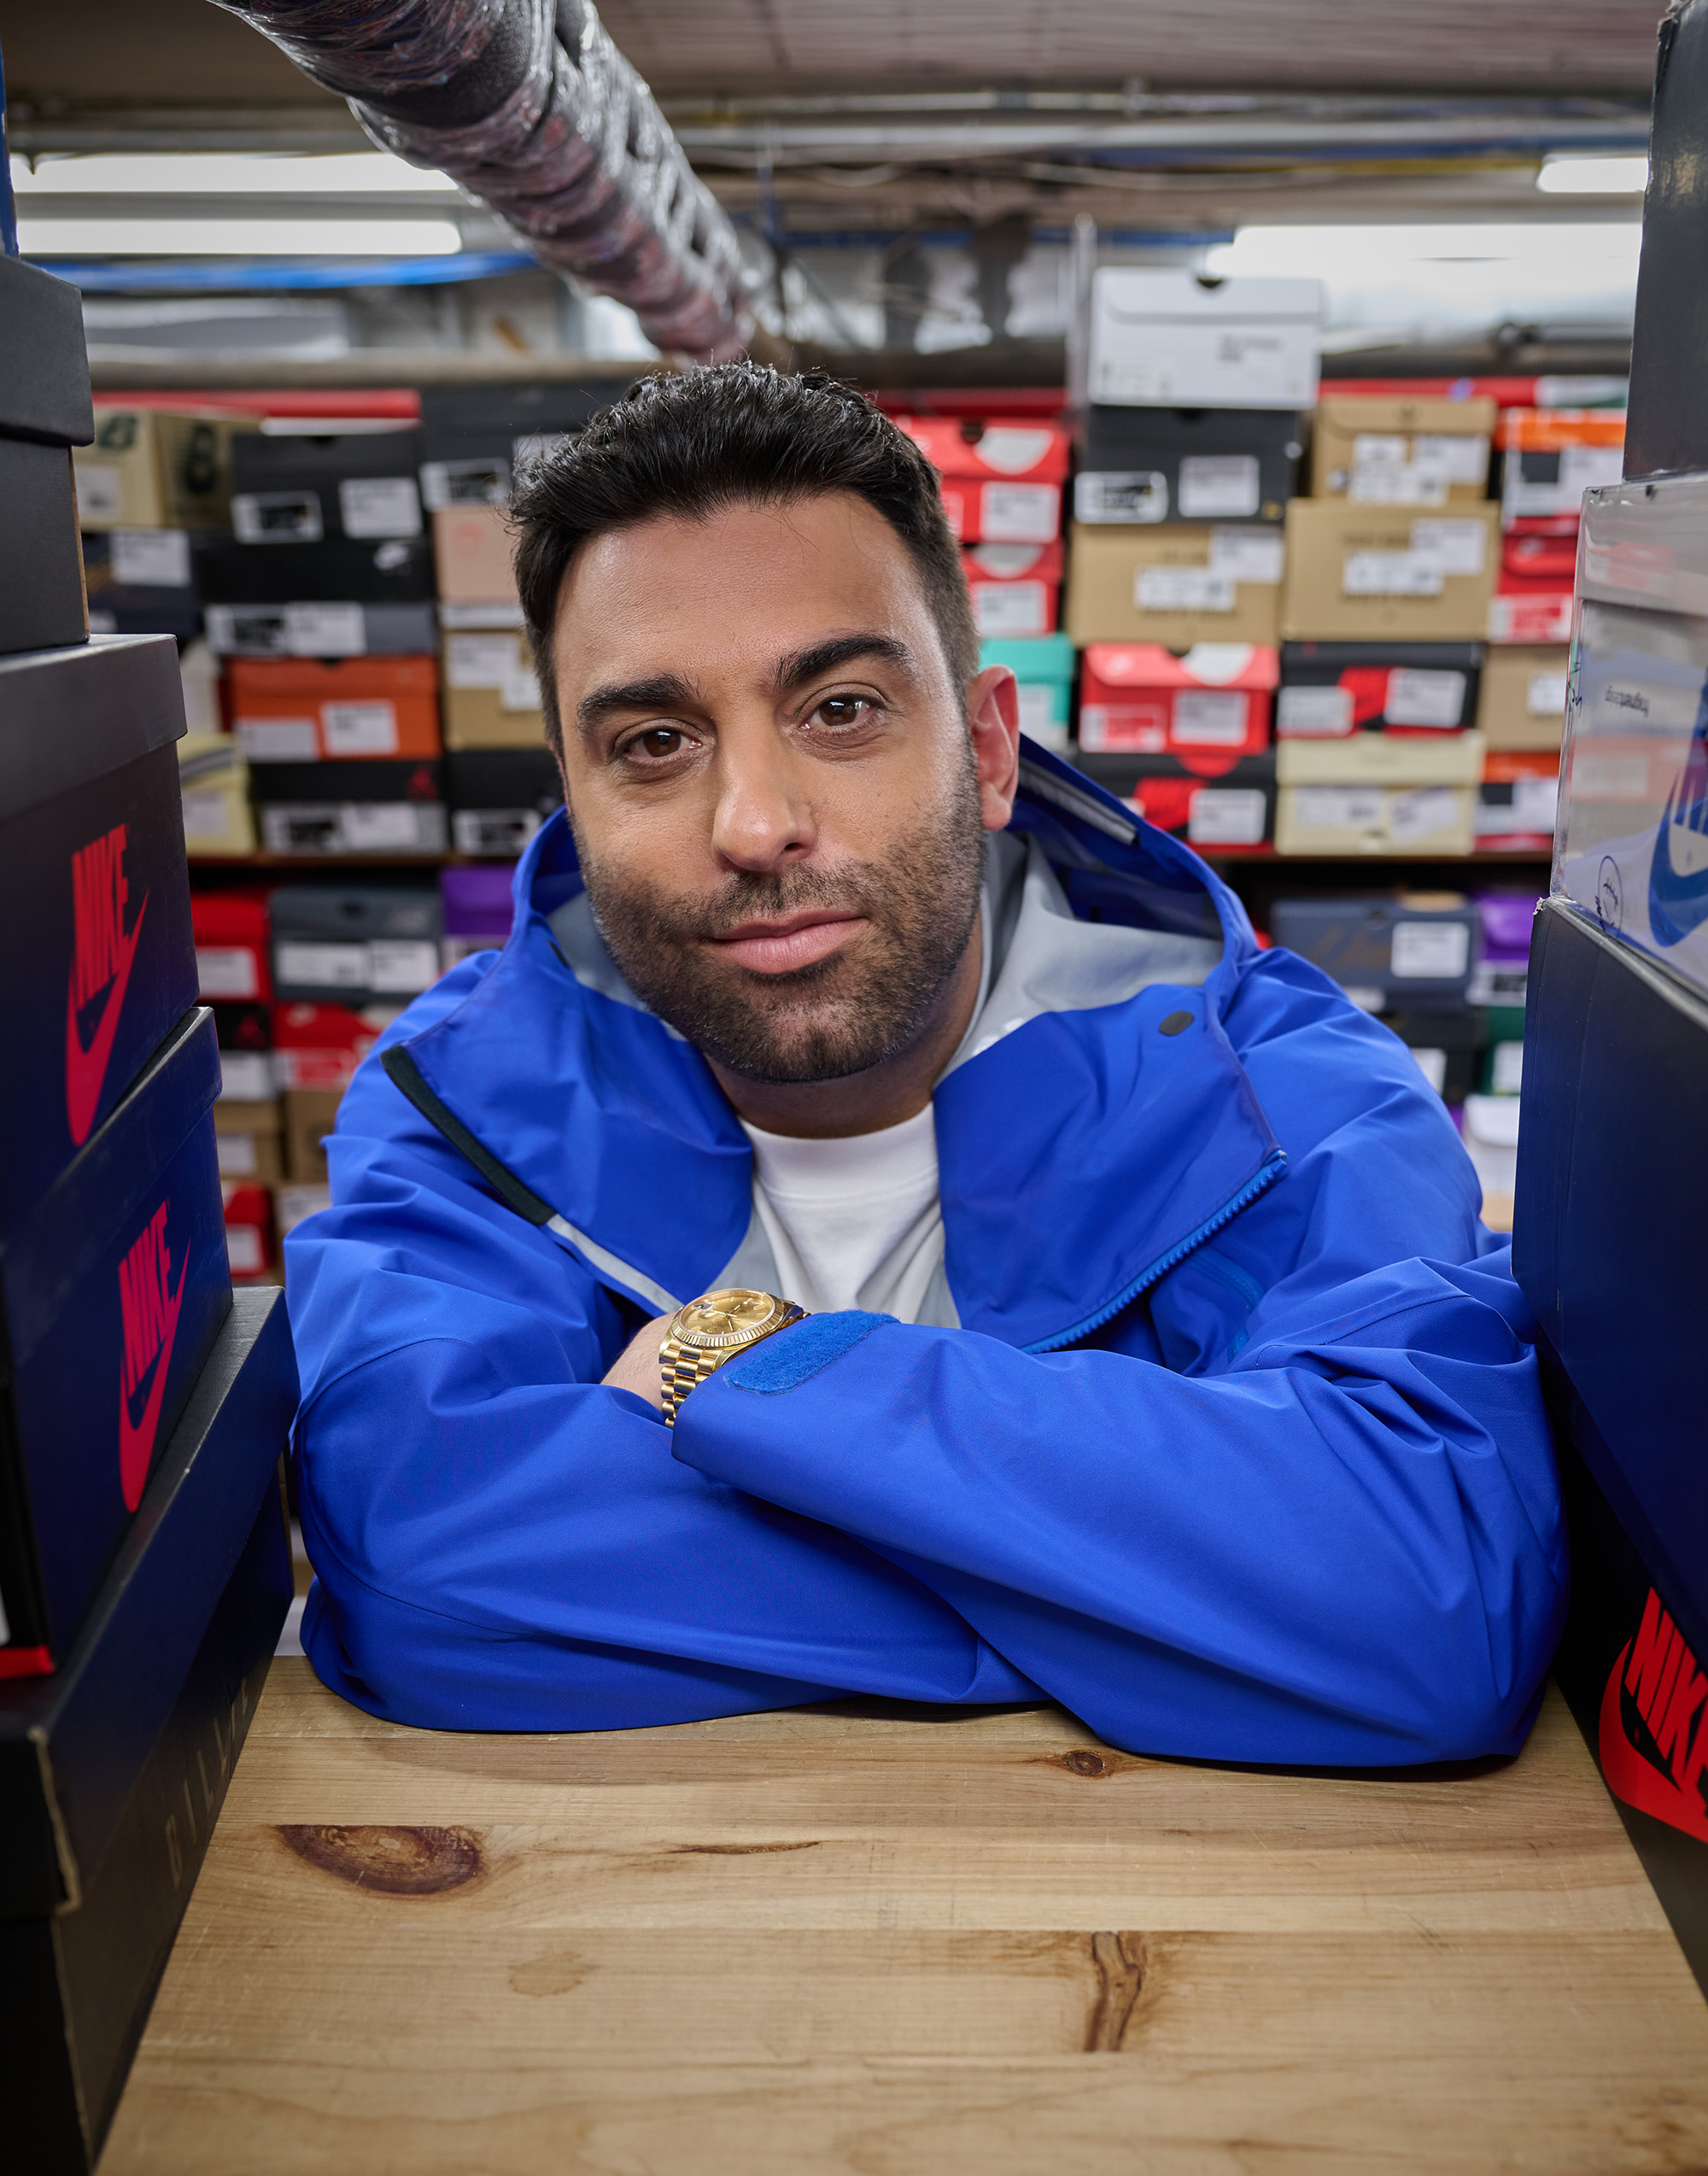 Joe La Puma poses in front of a stock of limited edition and rare sneakers from popular sneak brands, like Nike.